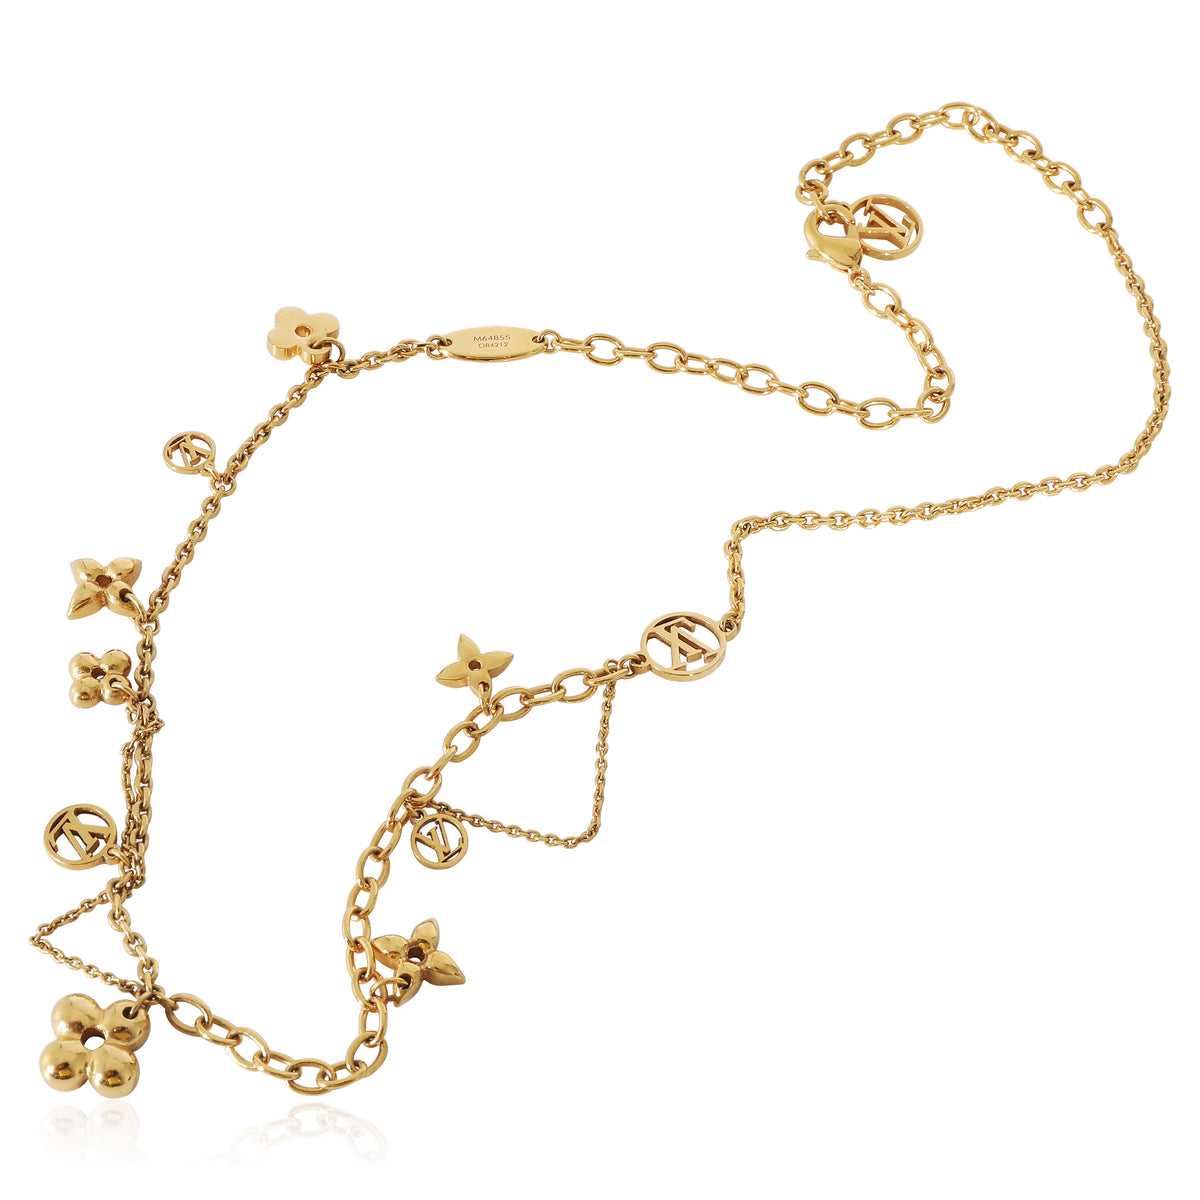 Louis Vuitton Blooming Supple Necklace Gold Metal